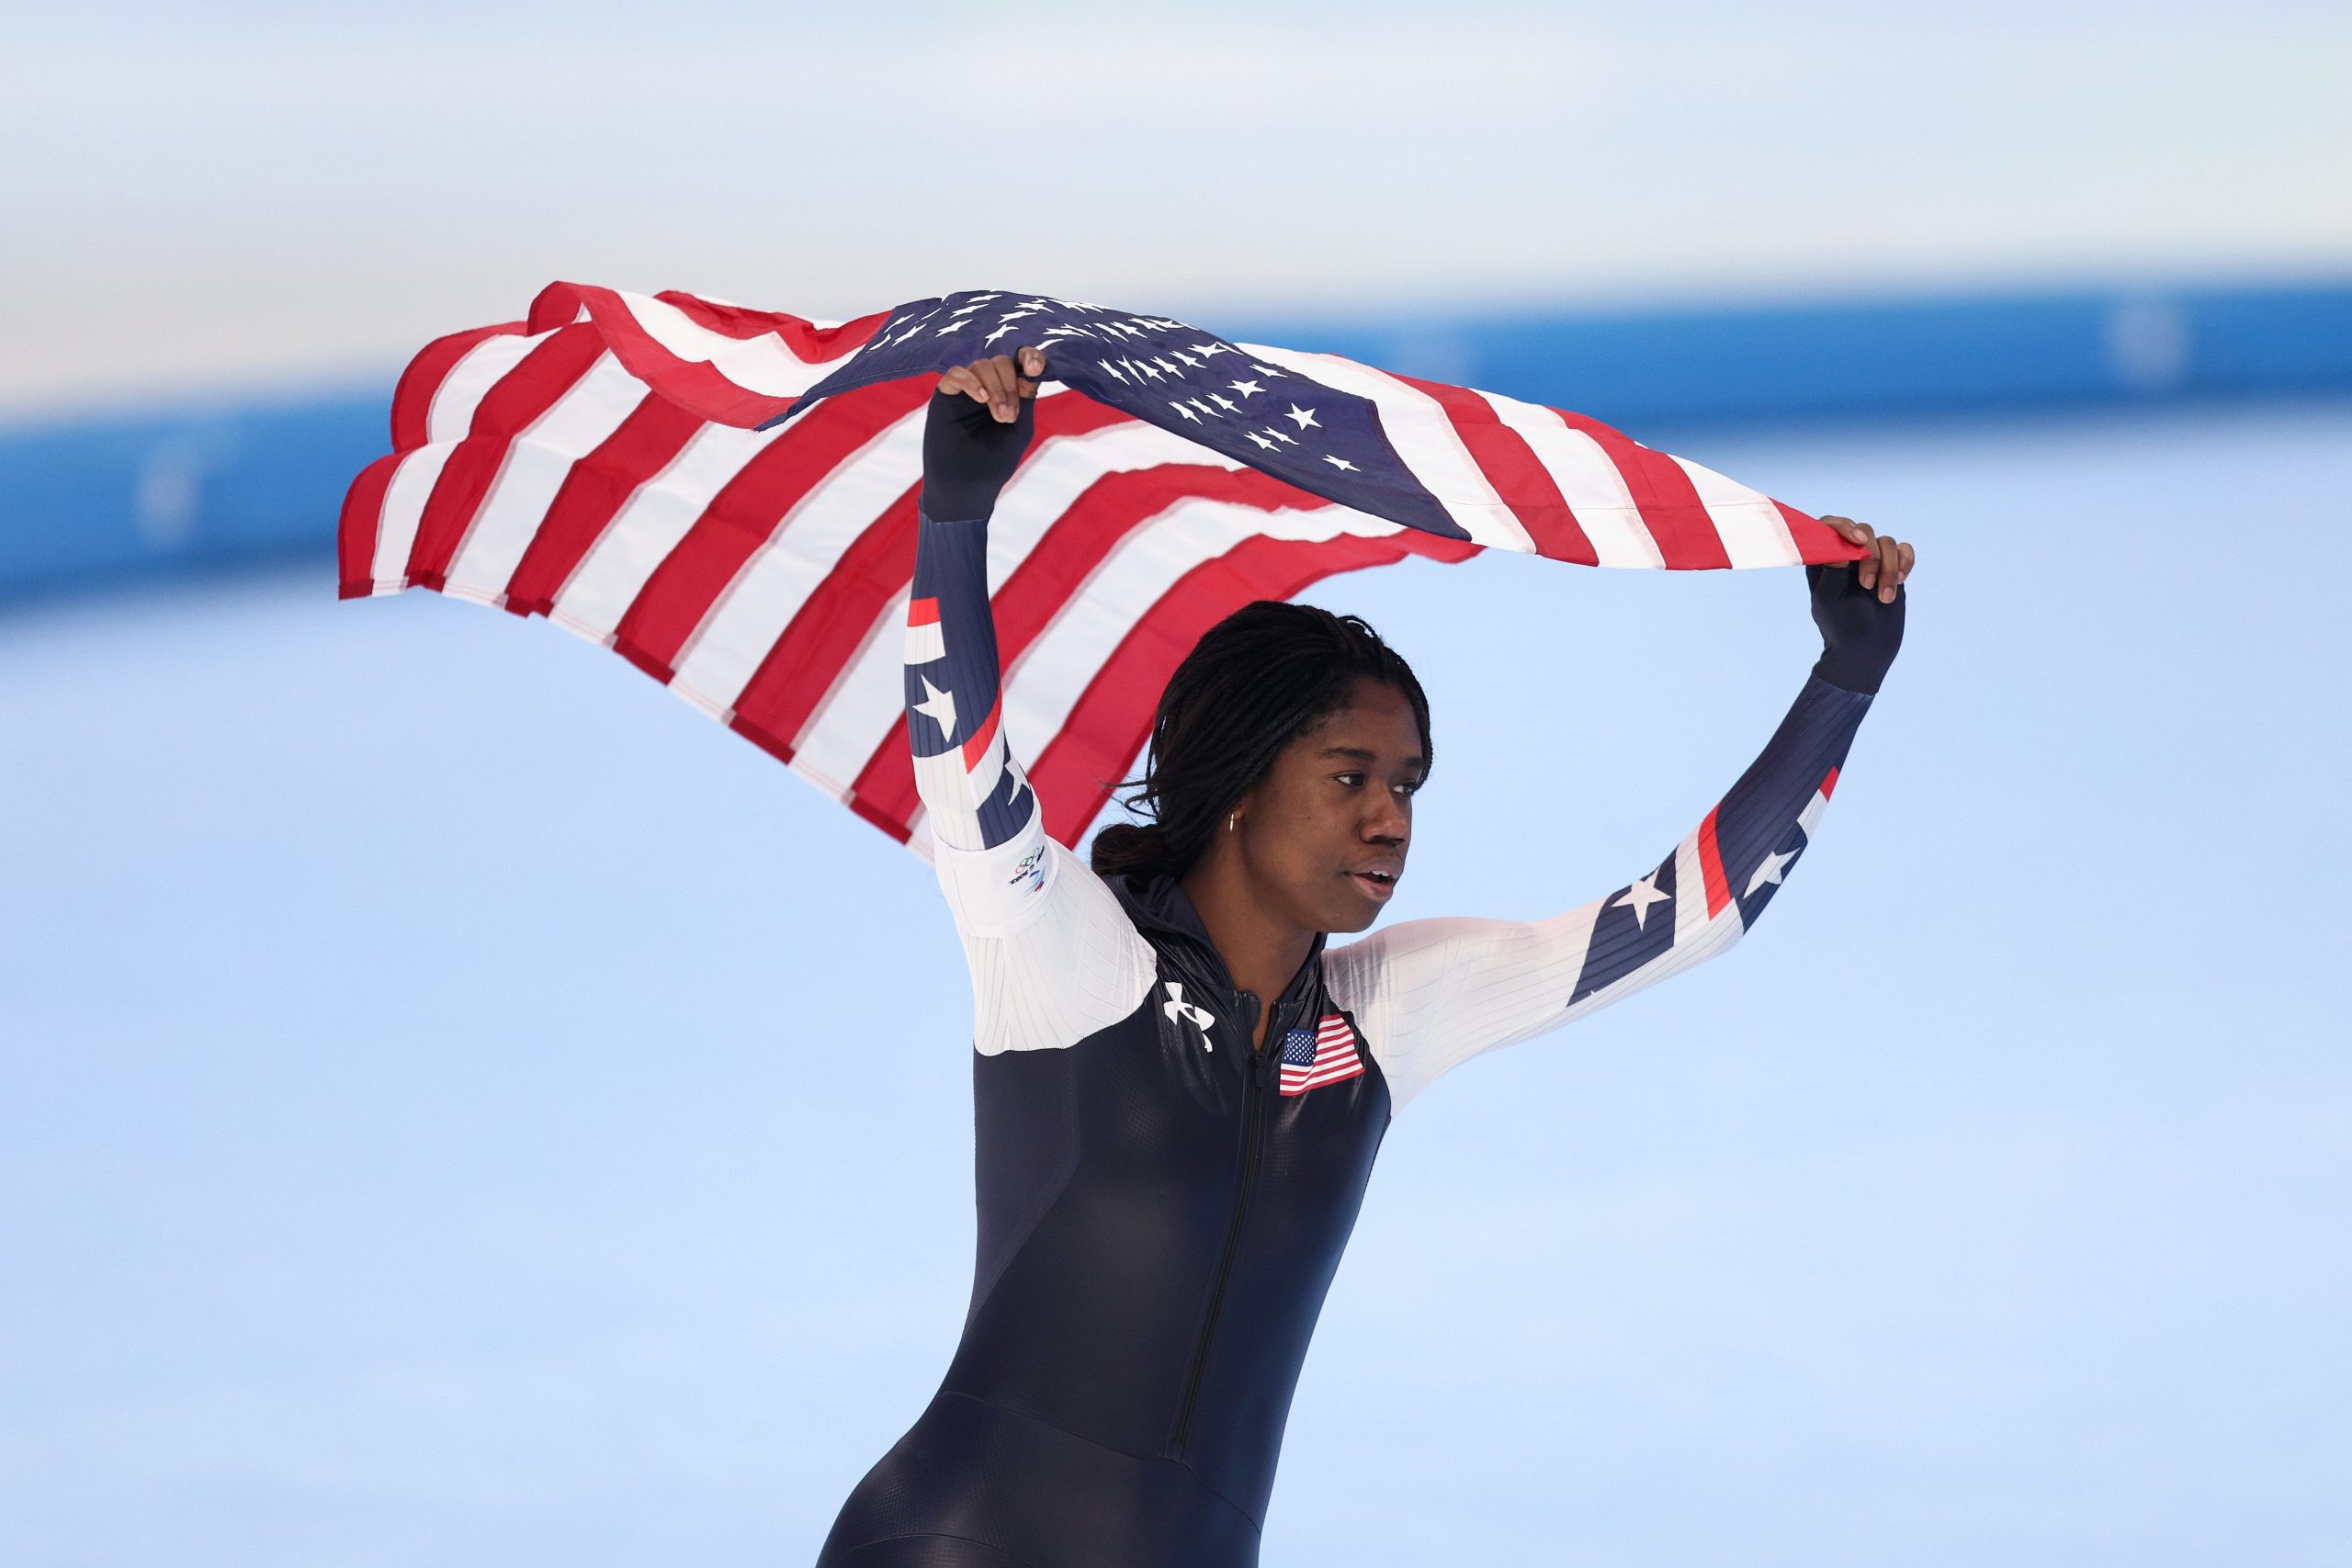 Speed skater Erin Jackson carrying American flag above her head after winning gold medal